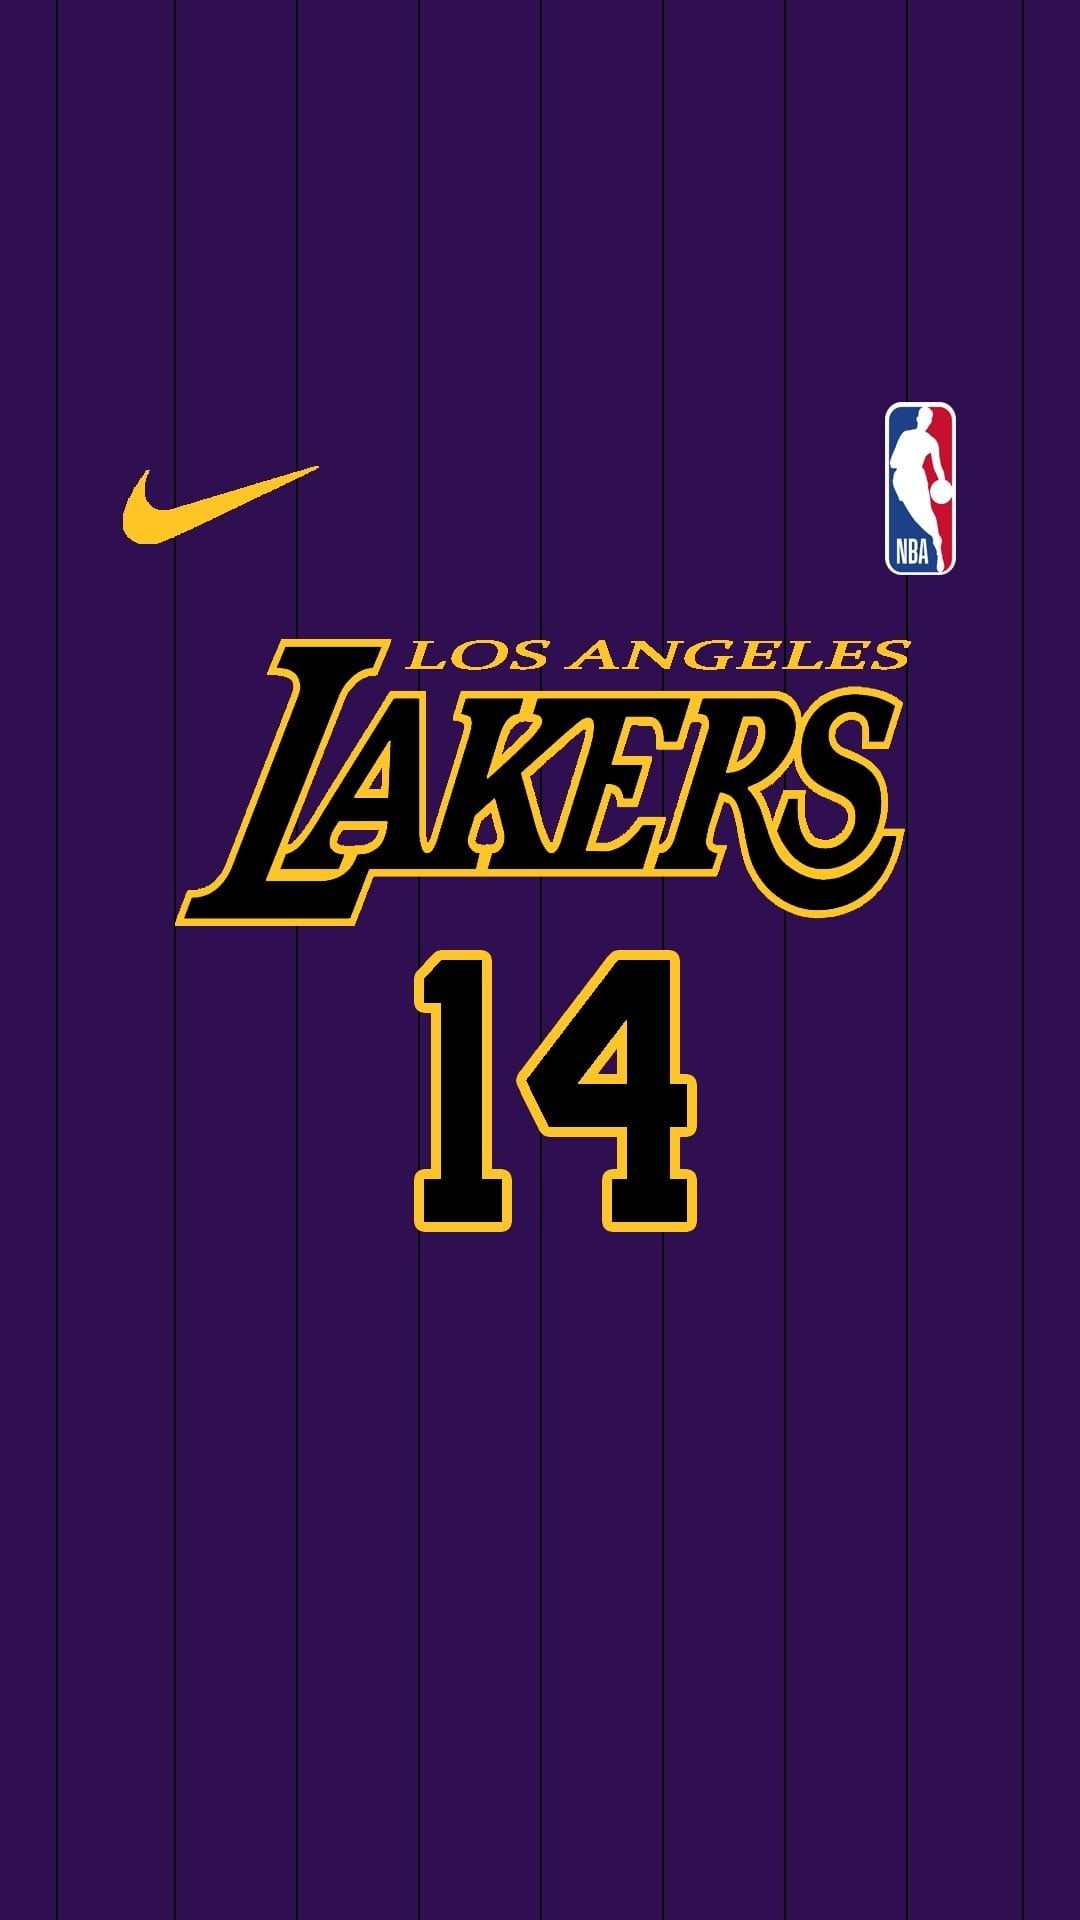 Los Angeles Lakers: The team defeated New York Knicks in the 1972 NBA World Championship Series. 1080x1920 Full HD Wallpaper.